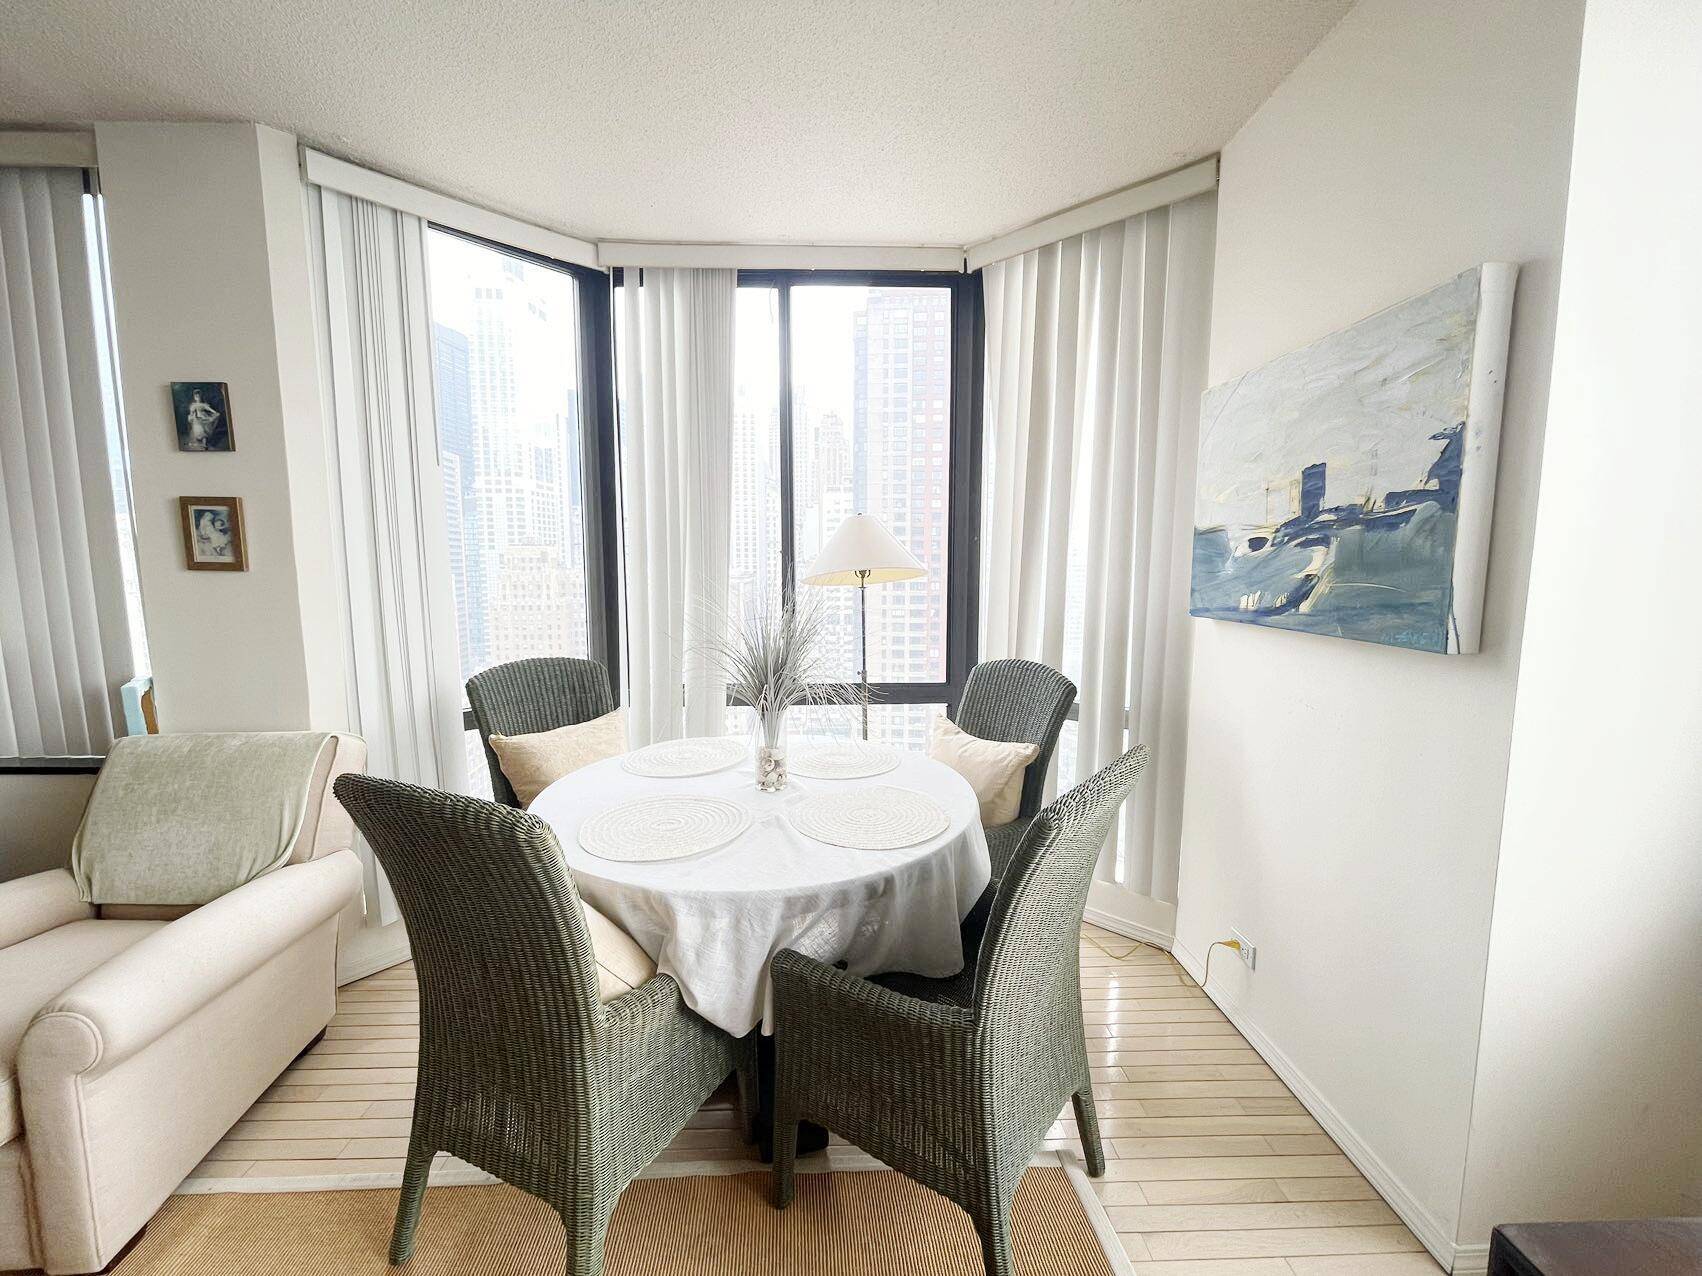 Direct Hudson River Views, Spacious living room, large windows, Sunny amp ; bright bedrooms and living room, P Condominium with 24 hr Concierge Service, Health Club amp ; Indoor Pool, ...